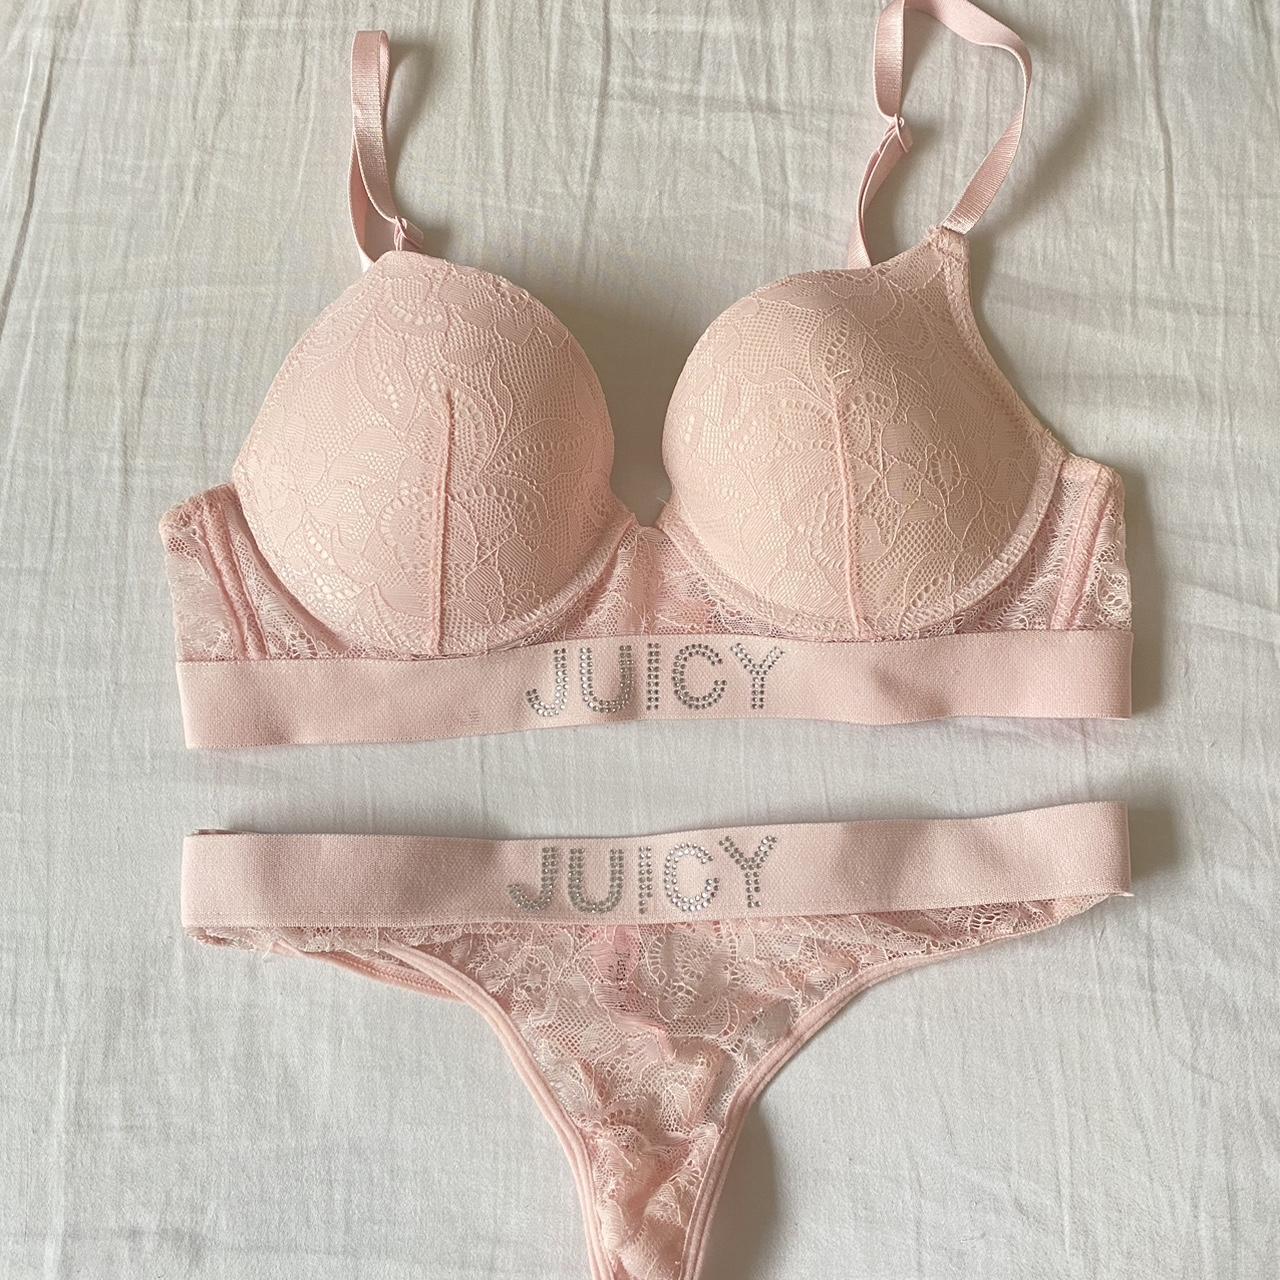 Juicy Couture Pink Set 💗💗 -34B bra and size small - Depop